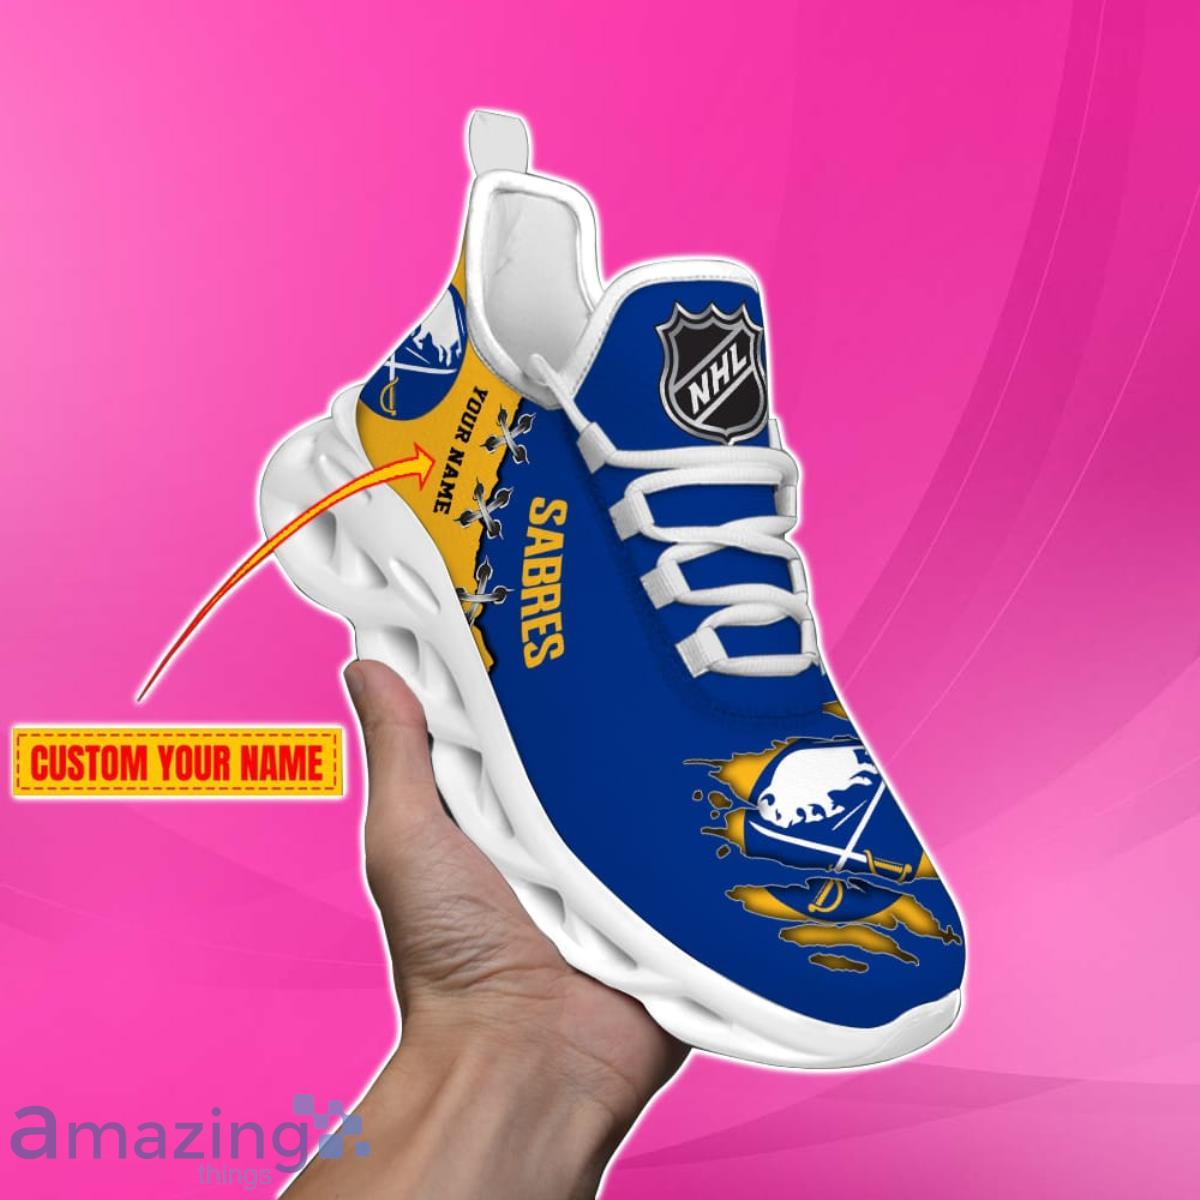 Buffalo Sabres gift ideas  Gifts for Sabres hockey fans